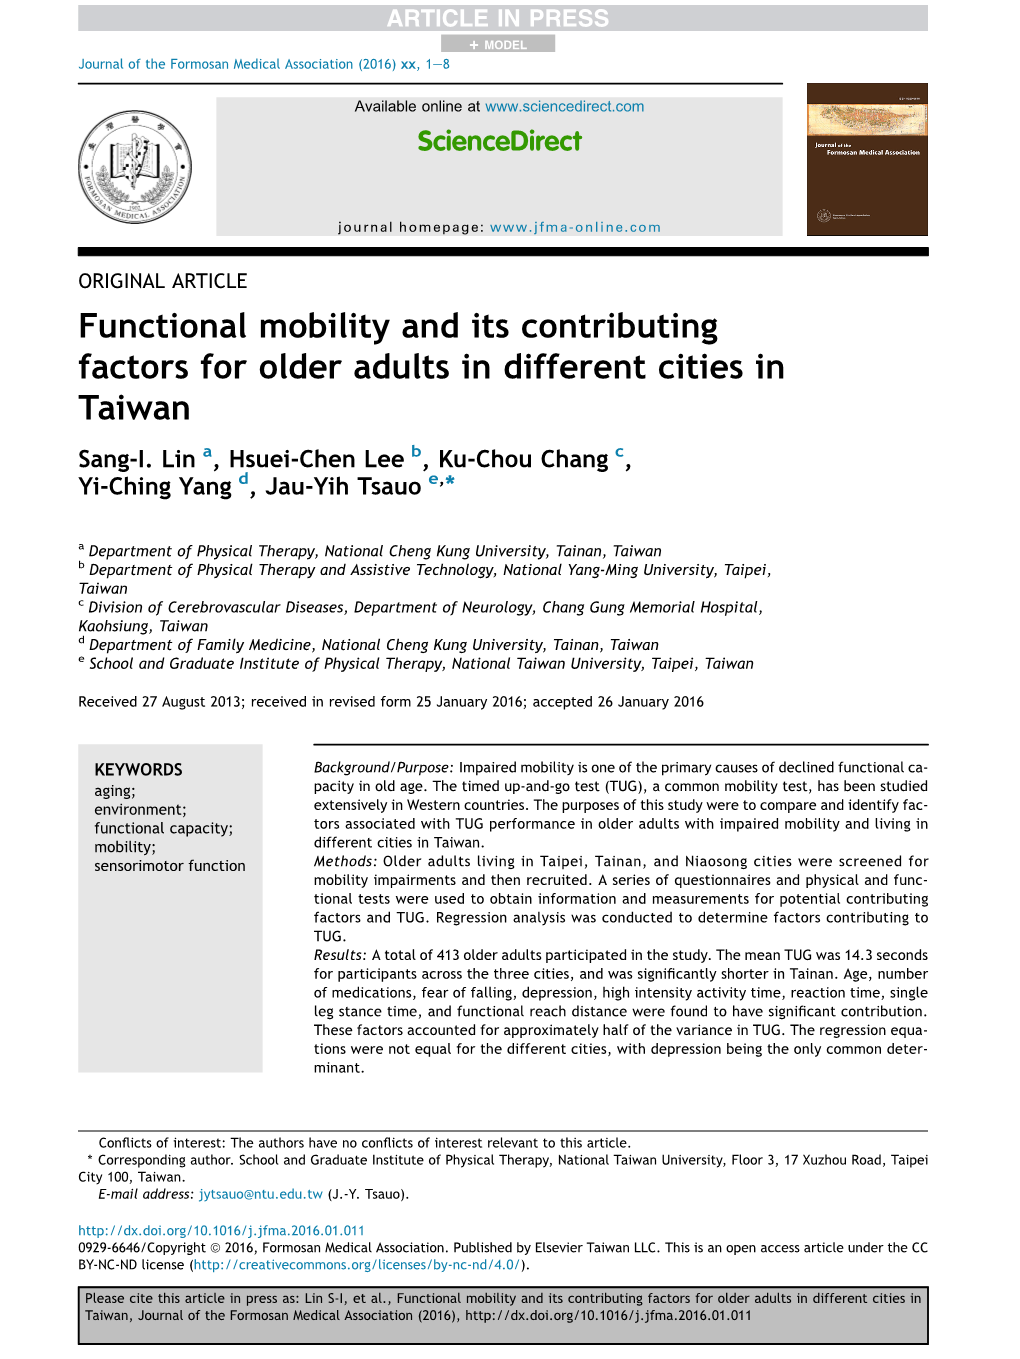 Functional Mobility and Its Contributing Factors for Older Adults in Different Cities in Taiwan Sang-I